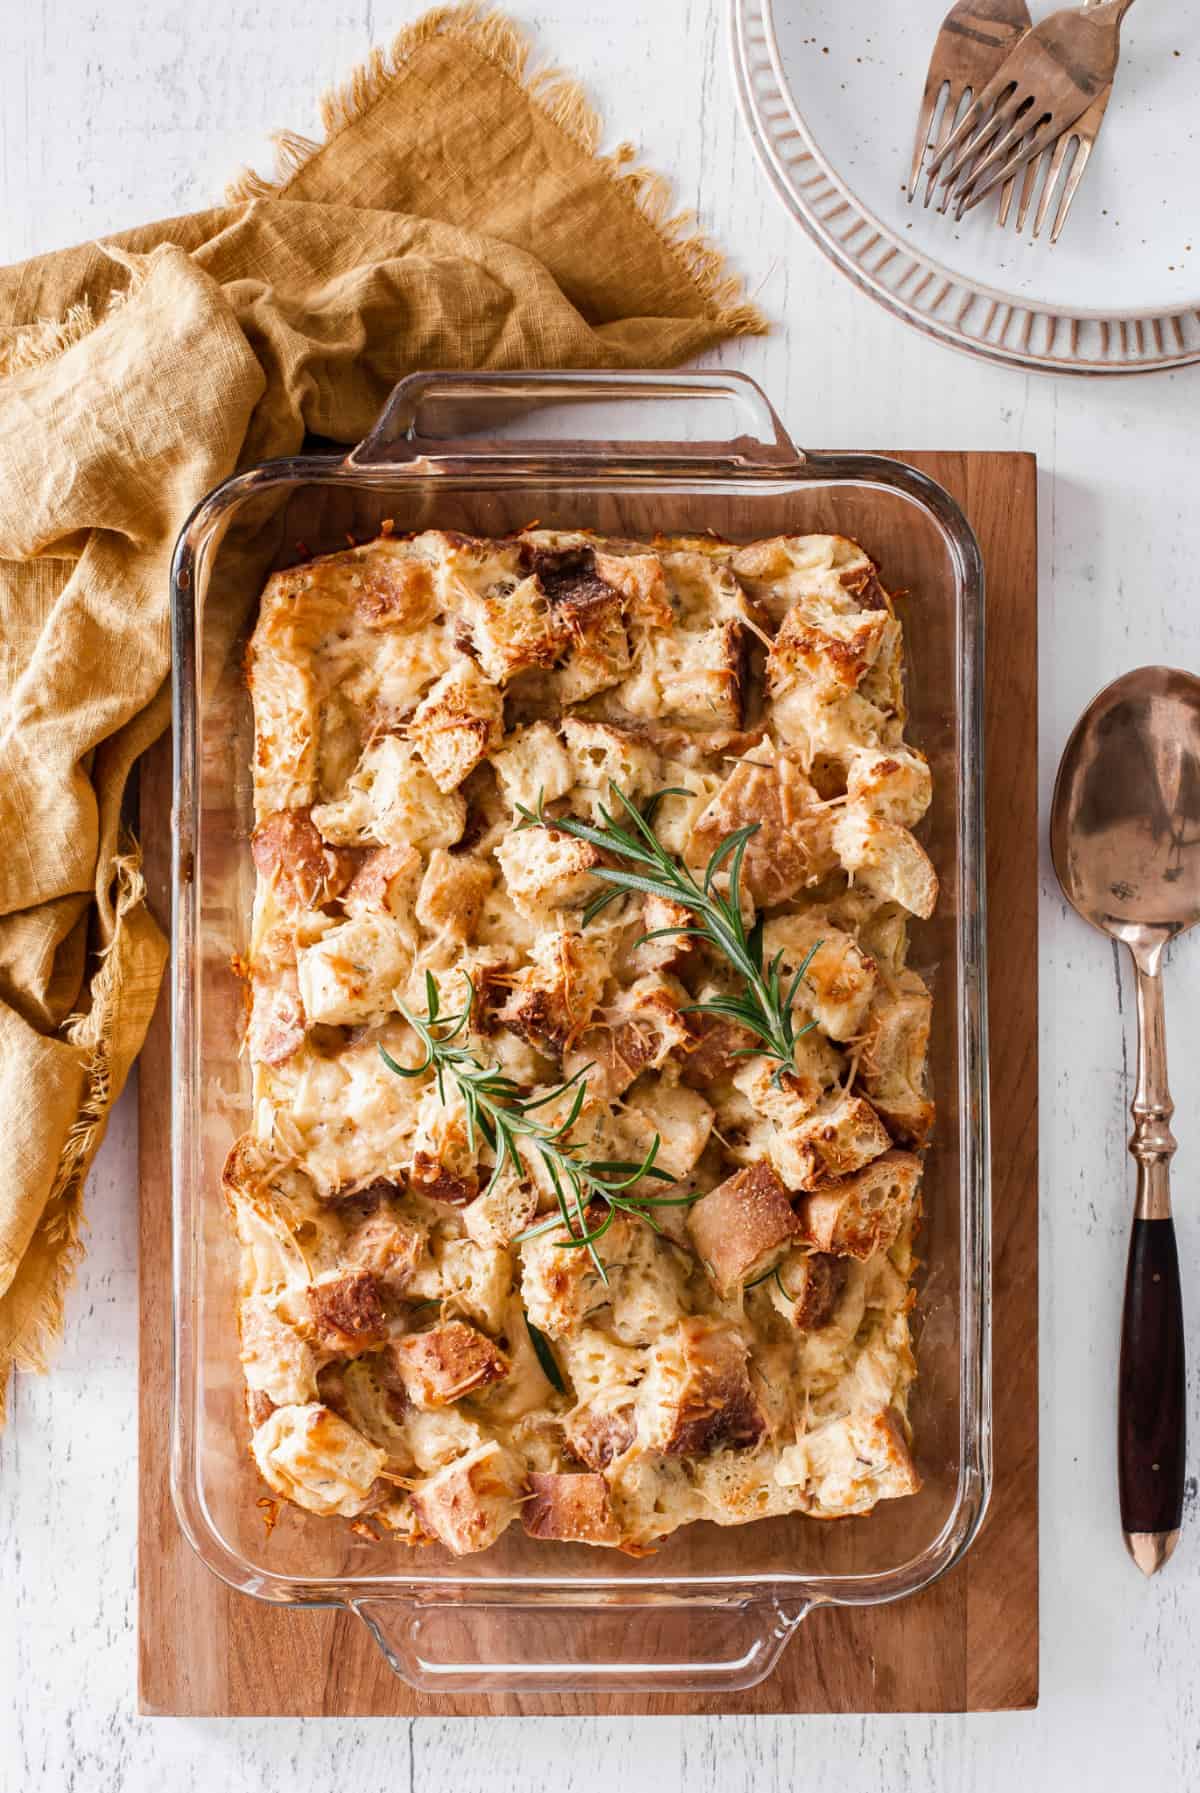 Parmesan and rosemary bread pudding in a casserole dish